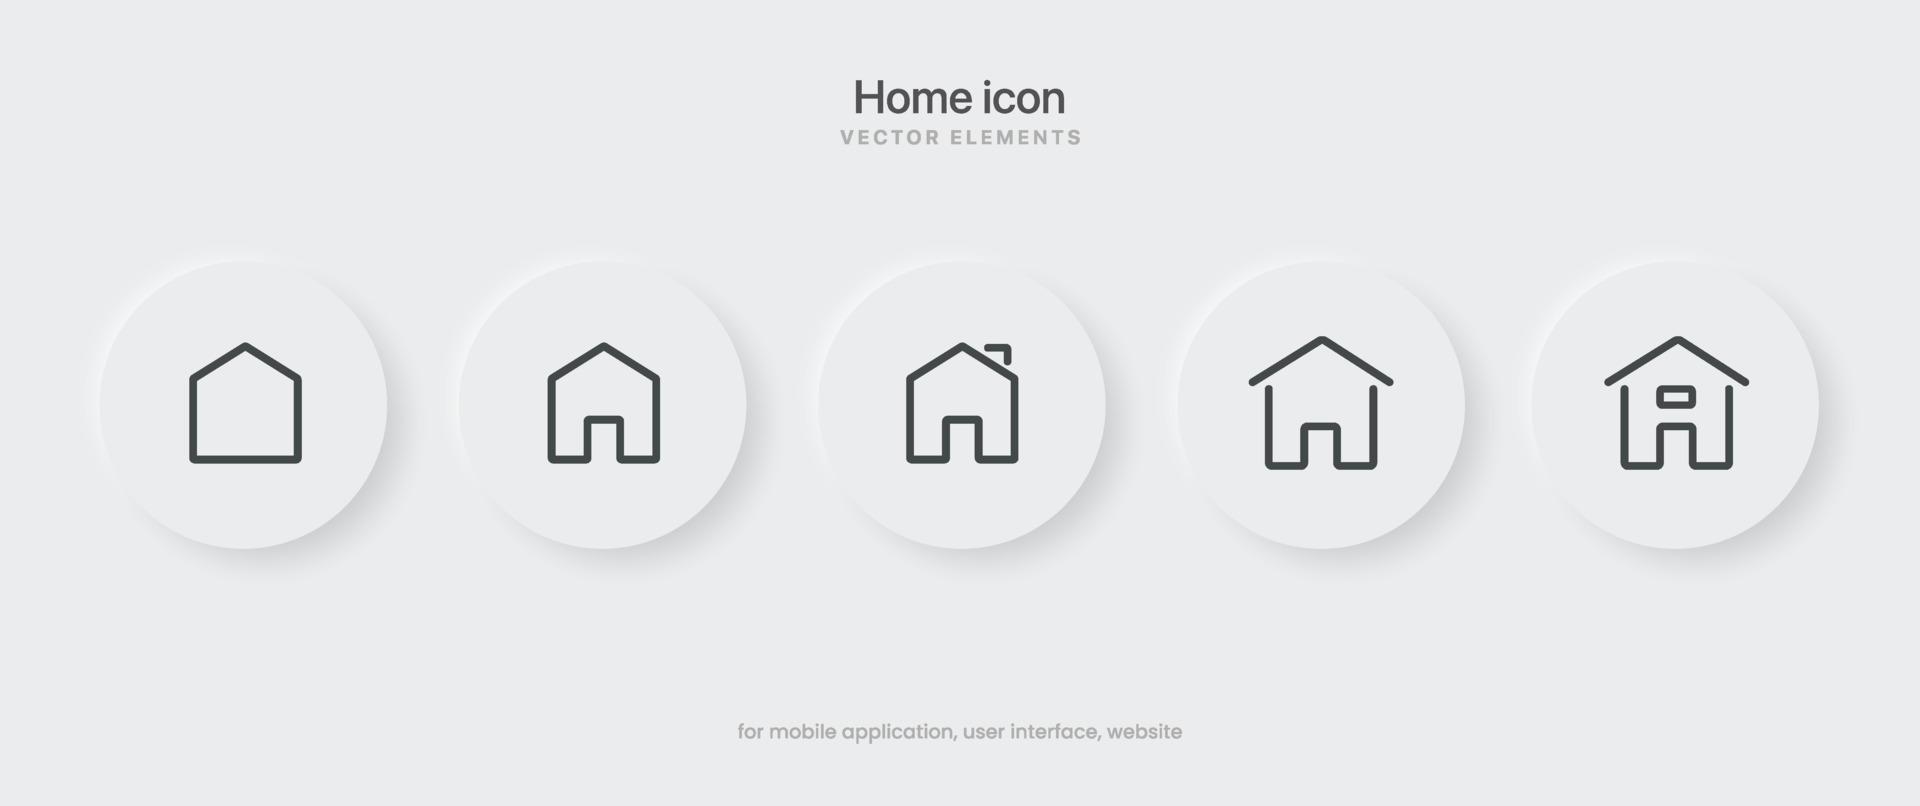 3d minimal modern home, homepage, base, main page, house push button icon emblem symbol, sign. 3d blue home icon. Mobile app icons. Device UI UX mockup. Isolated vector elements.